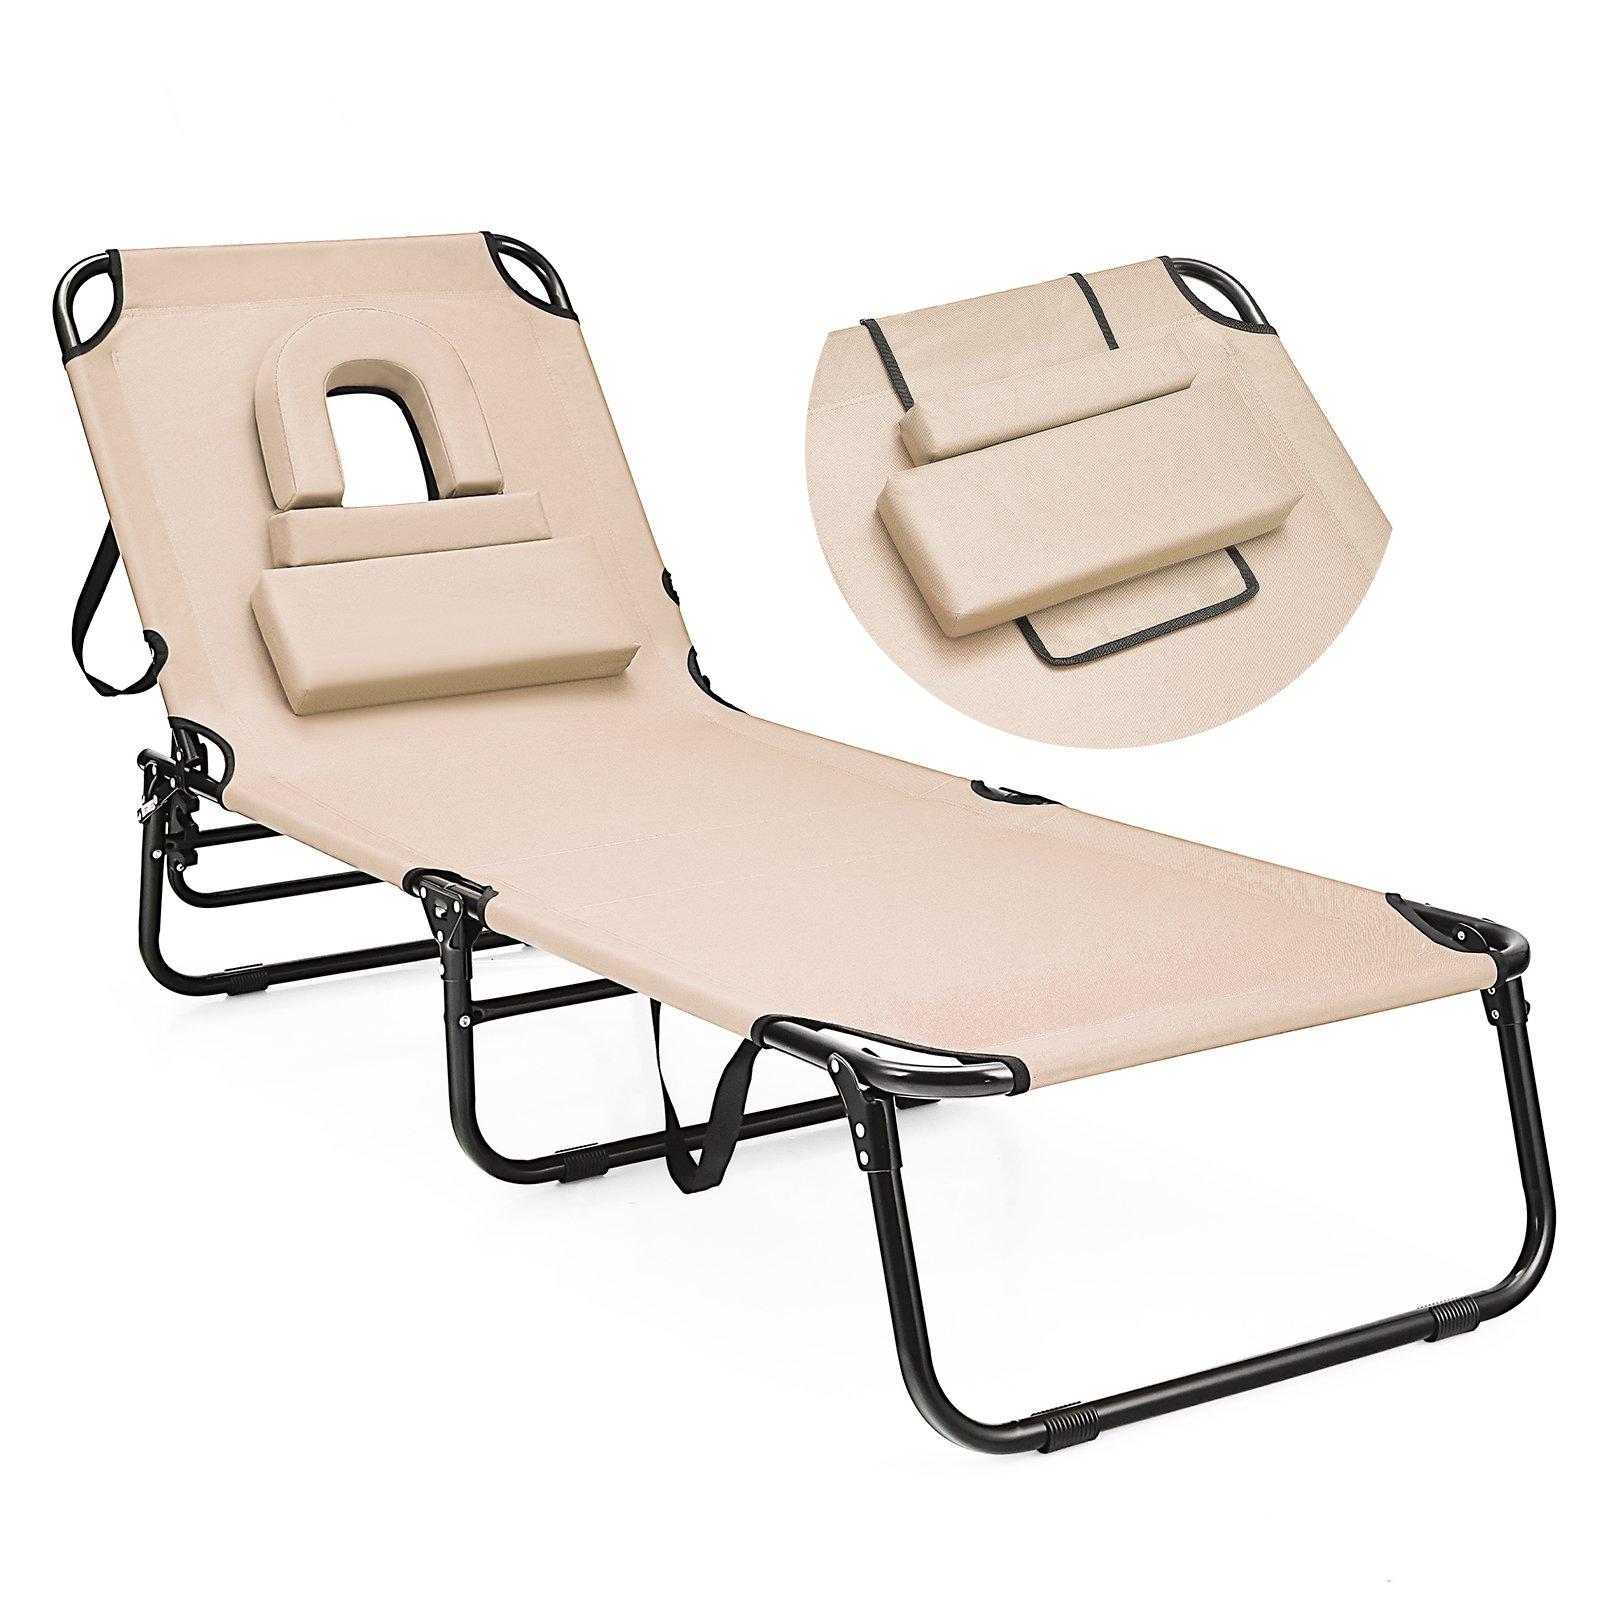 Folding Face Down Tanning Chair Adjustable Beach Lounge Chair W/ Face Hole